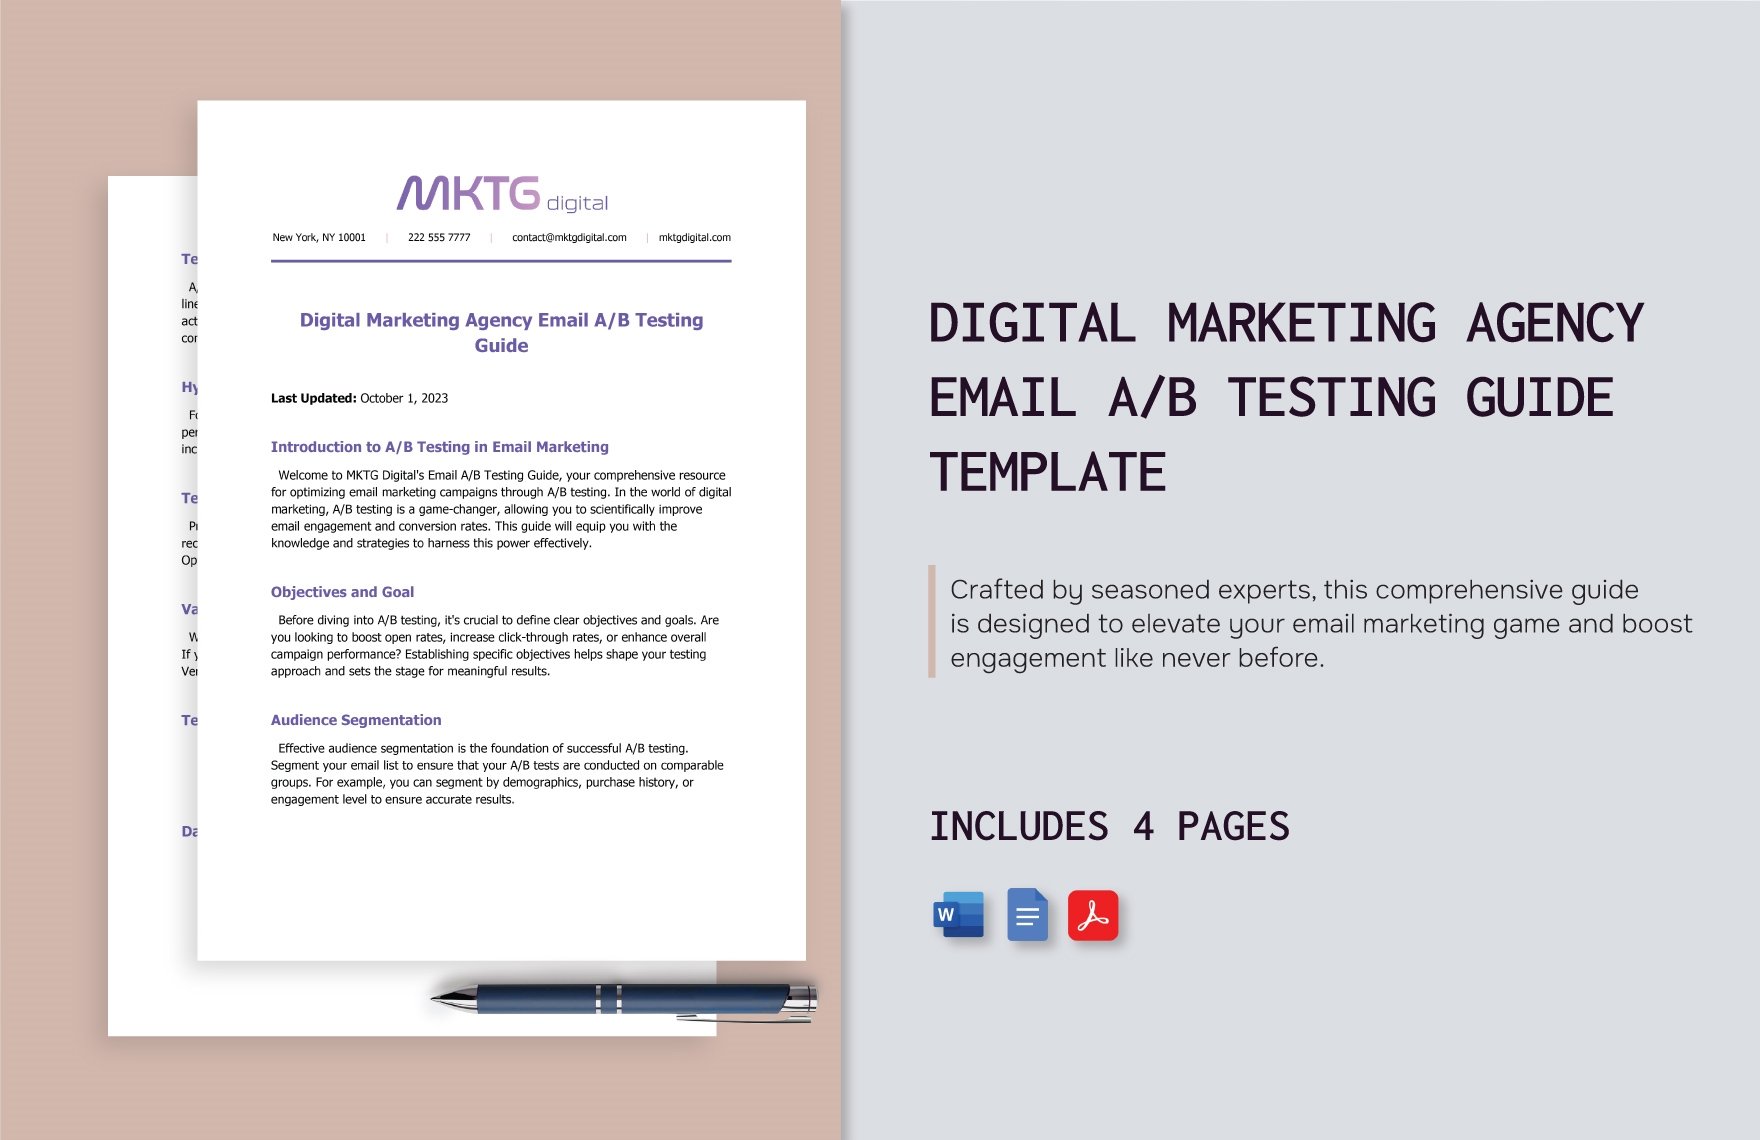 Digital Marketing Agency Email A/B Testing Guide Template